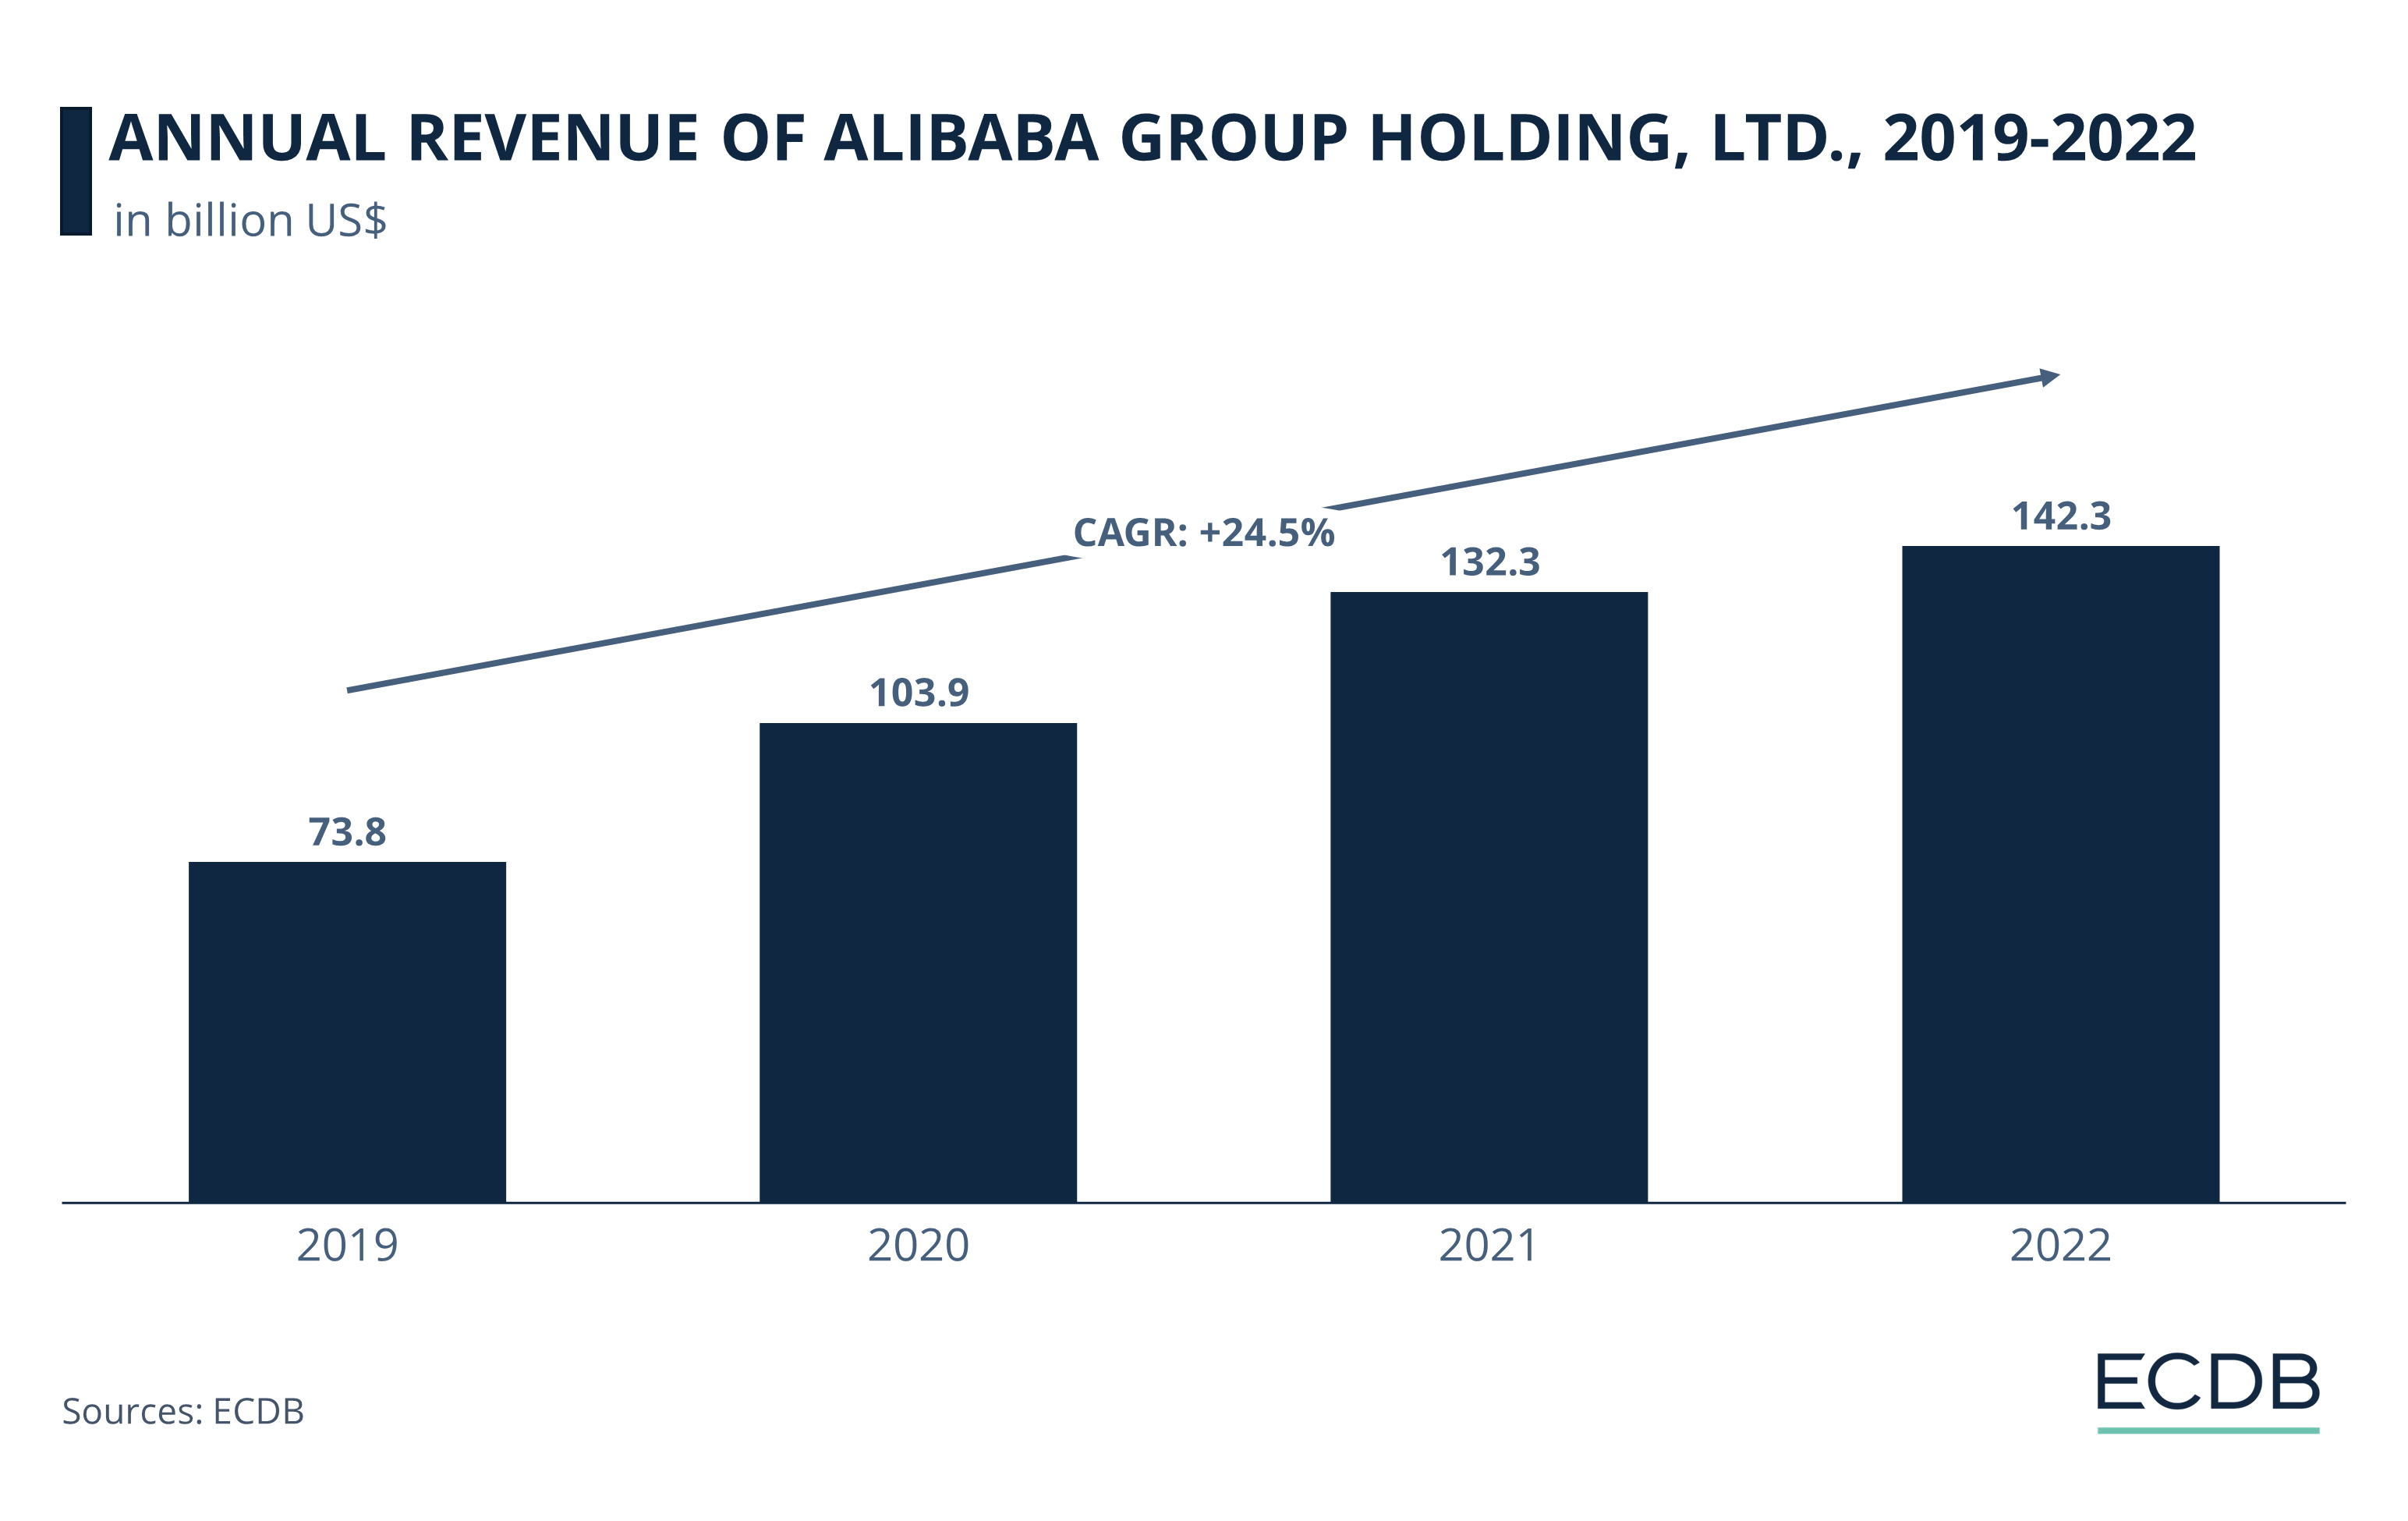 Annual Revenue of Alibaba Group Holding Ltd, 2019-2022